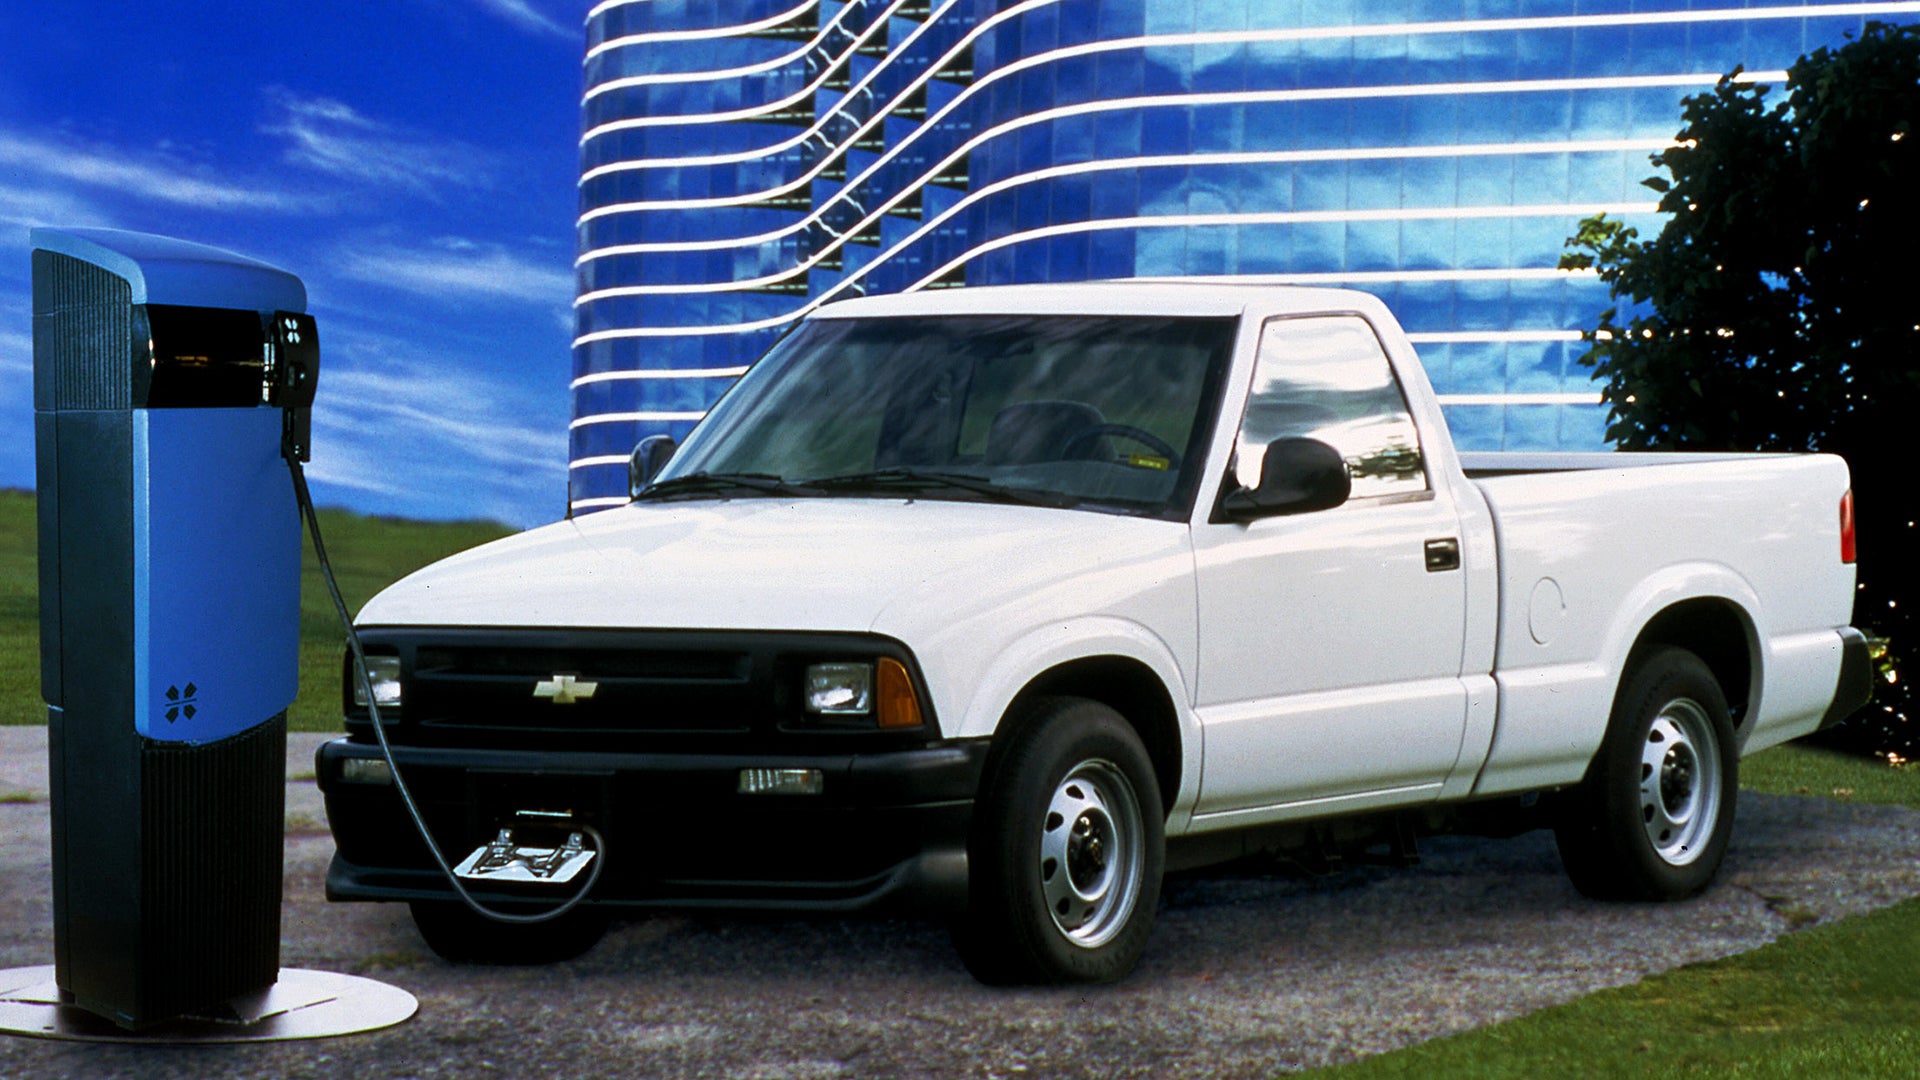 Forget the Cybertruck: Get Yourself a Factory 1997 Chevrolet S-10 Electric Pickup